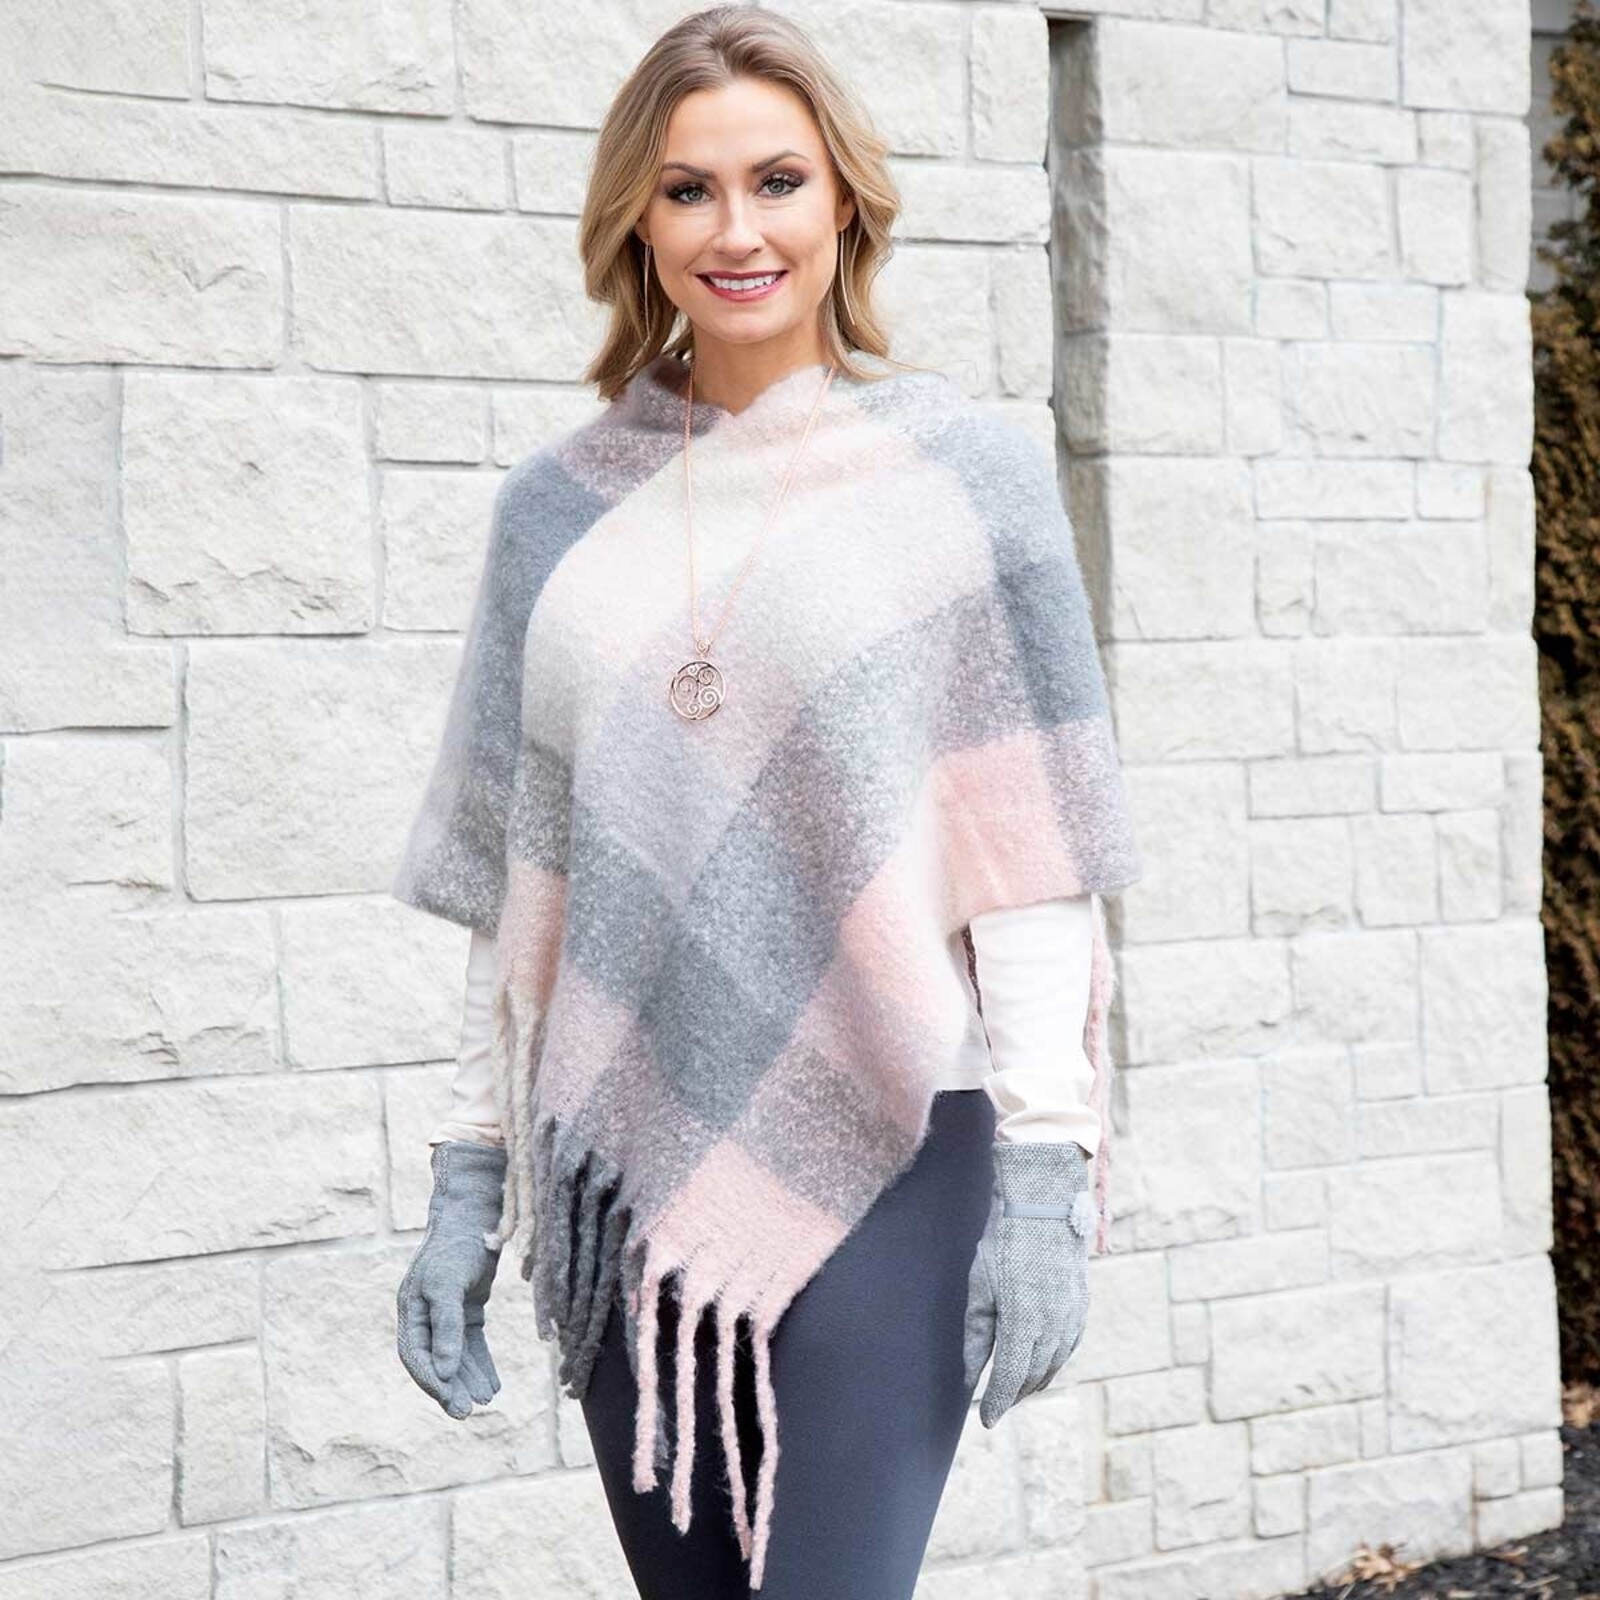 Meravic Pink and Grey Plaid Knit Poncho with Fringe 34"x36" loading=